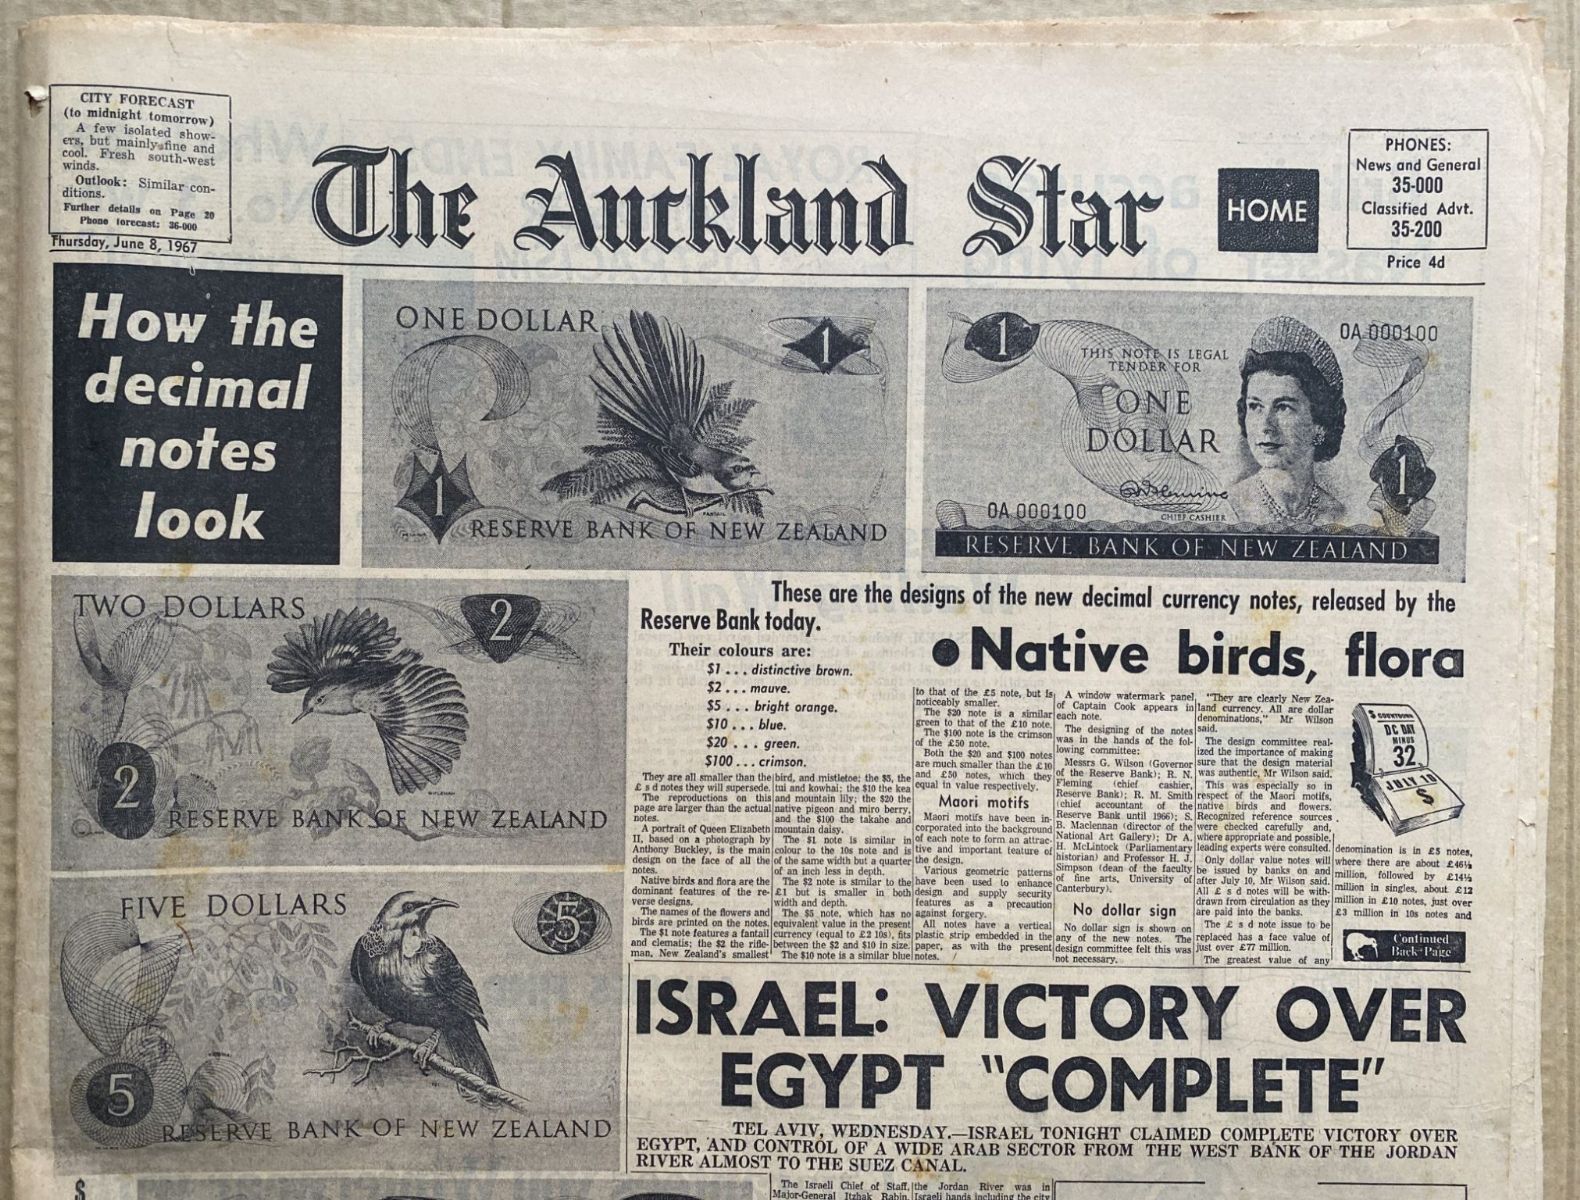 OLD NEWSPAPER: The Auckland Star, 8 June 1967 - Decimal currency changeover